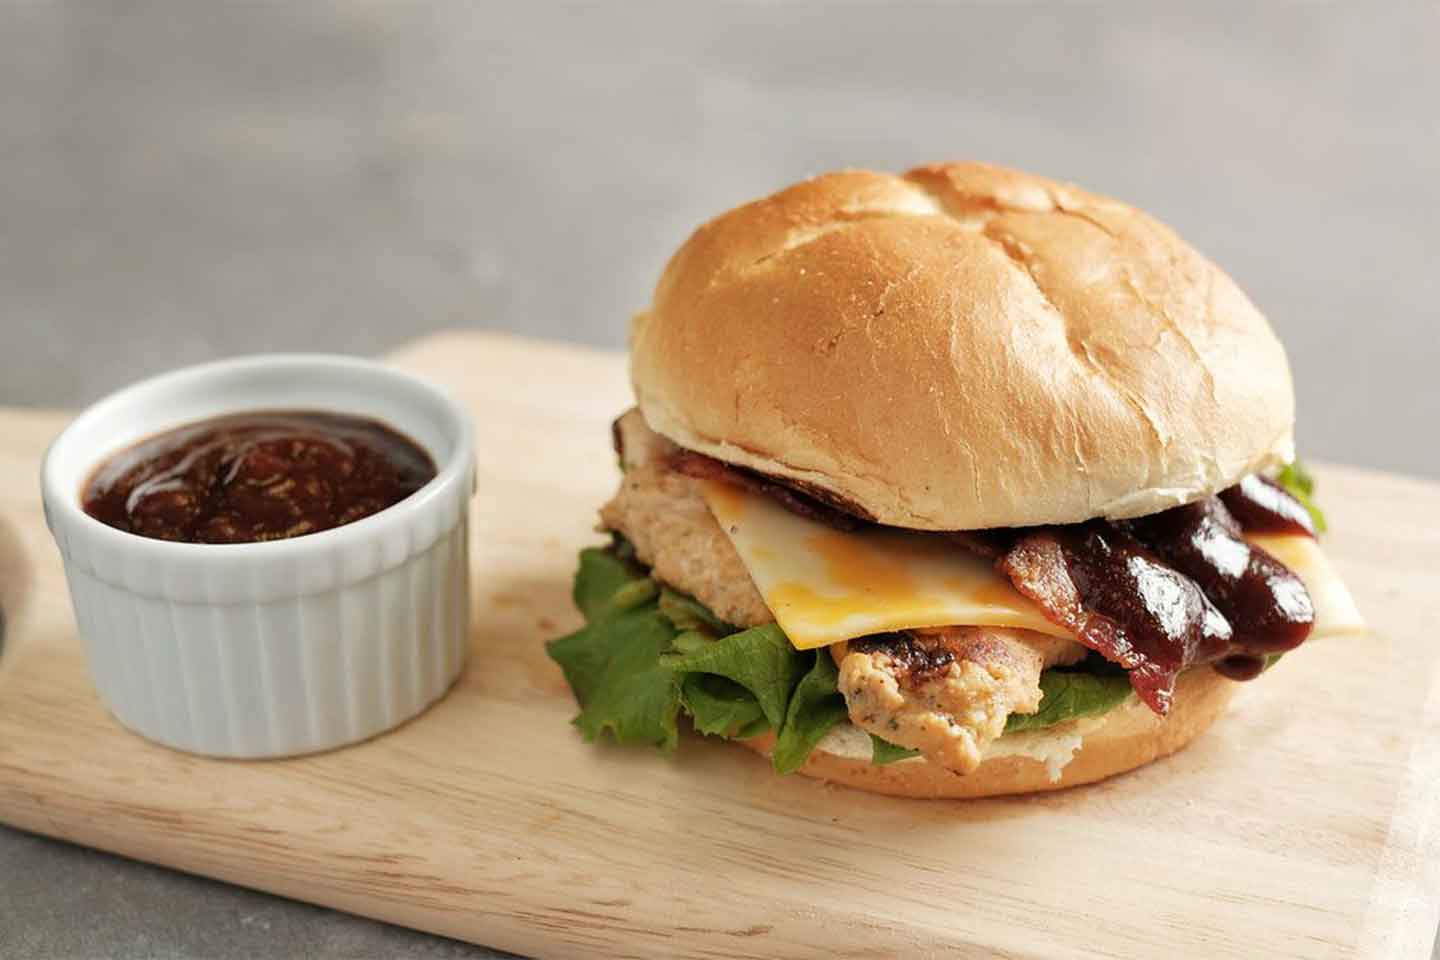 Chick-fil-A Smokehouse BBQ Bacon Sandwich with a side of barbeque sauce